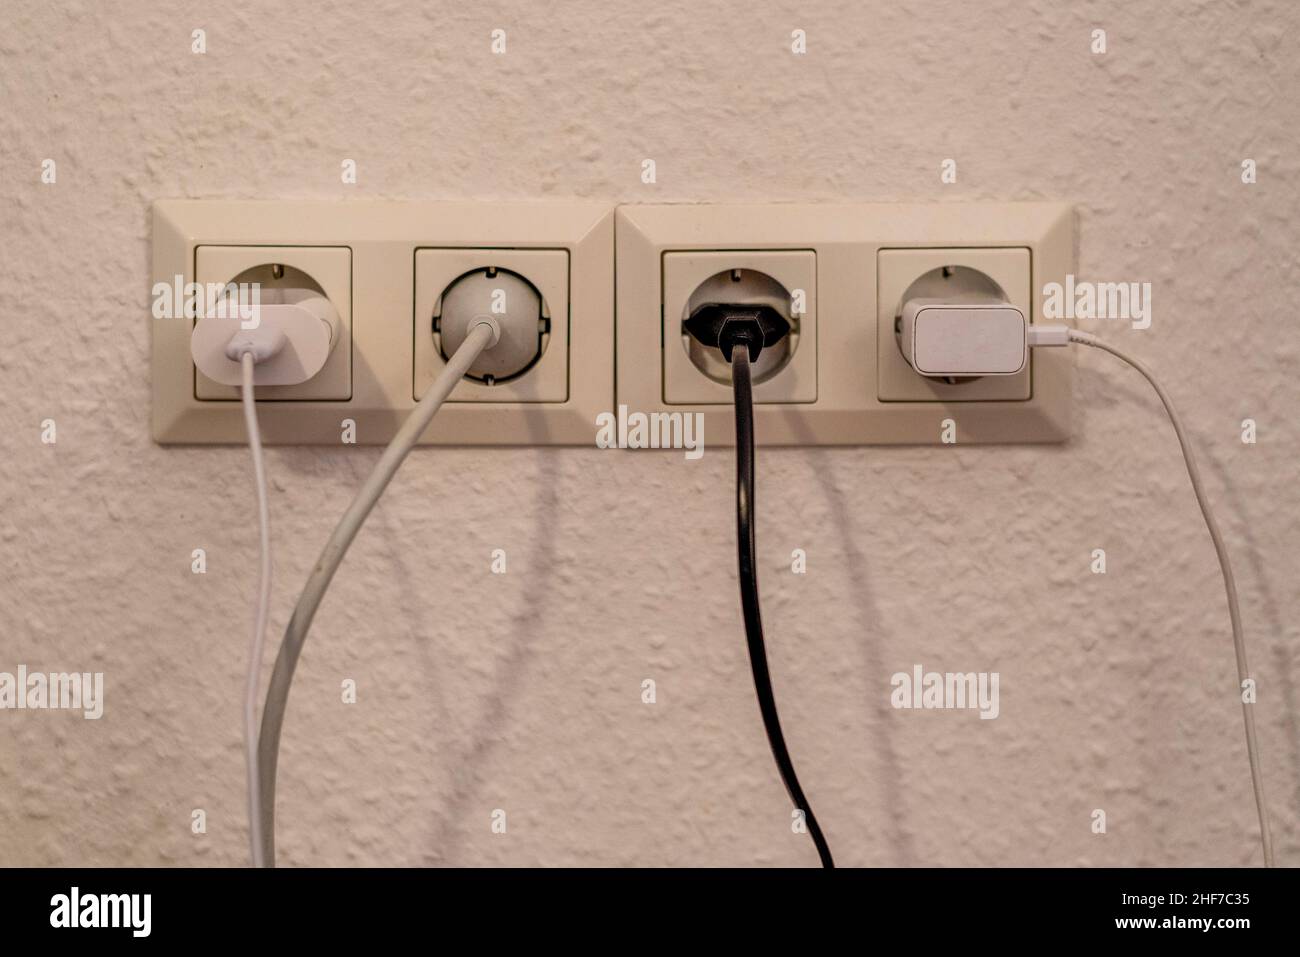 Four occupied sockets. Stock Photo